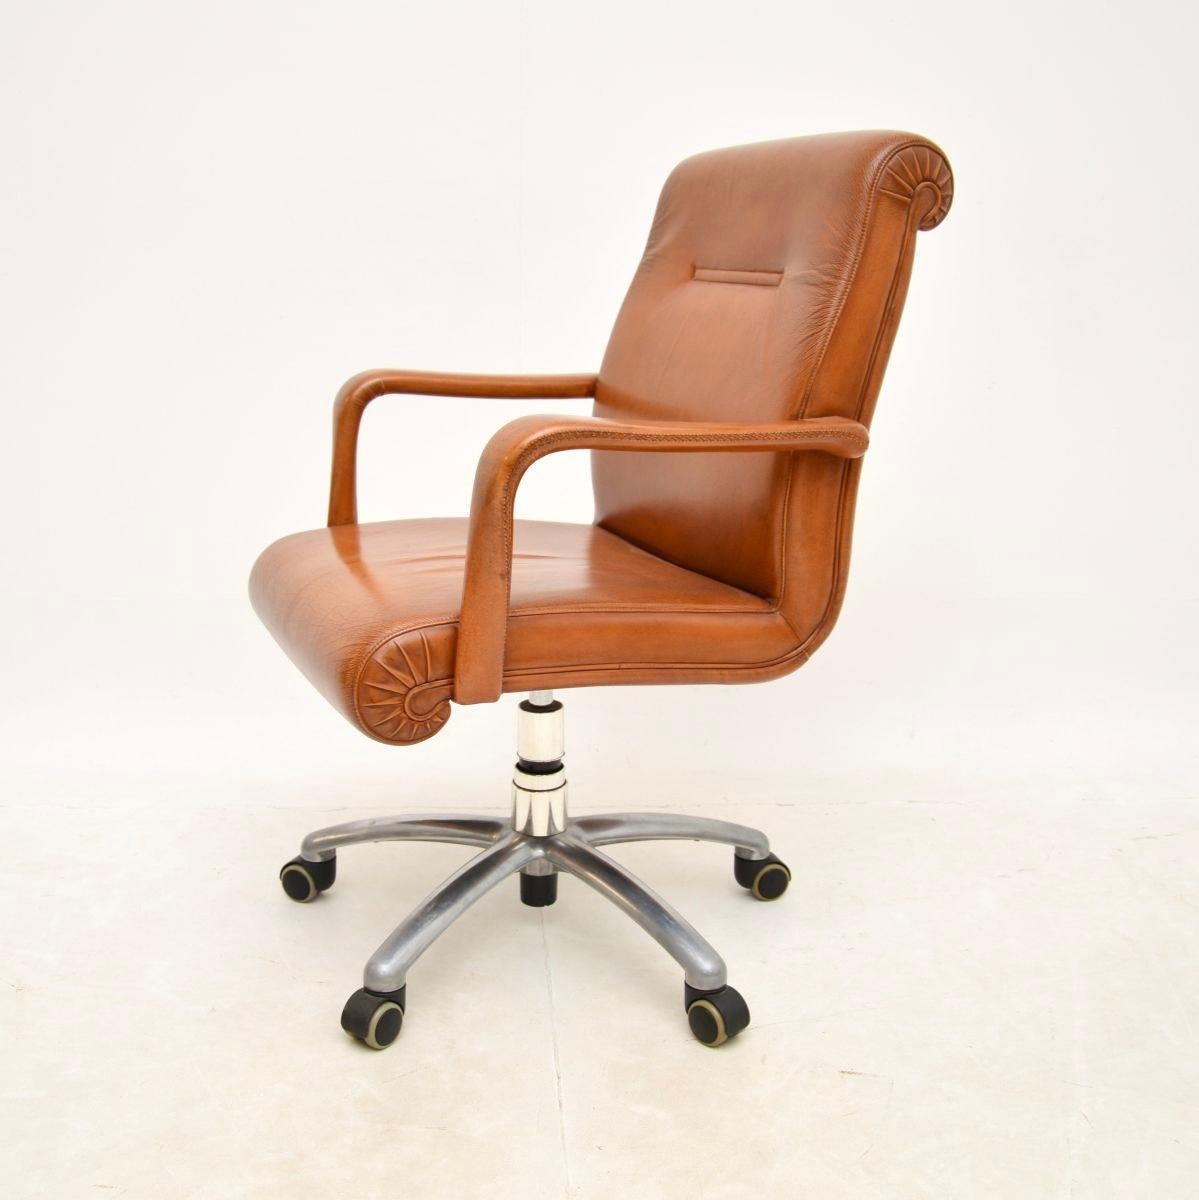 Vintage Italian Leather Swivel Desk Chair by Poltrona Frau In Good Condition For Sale In London, GB